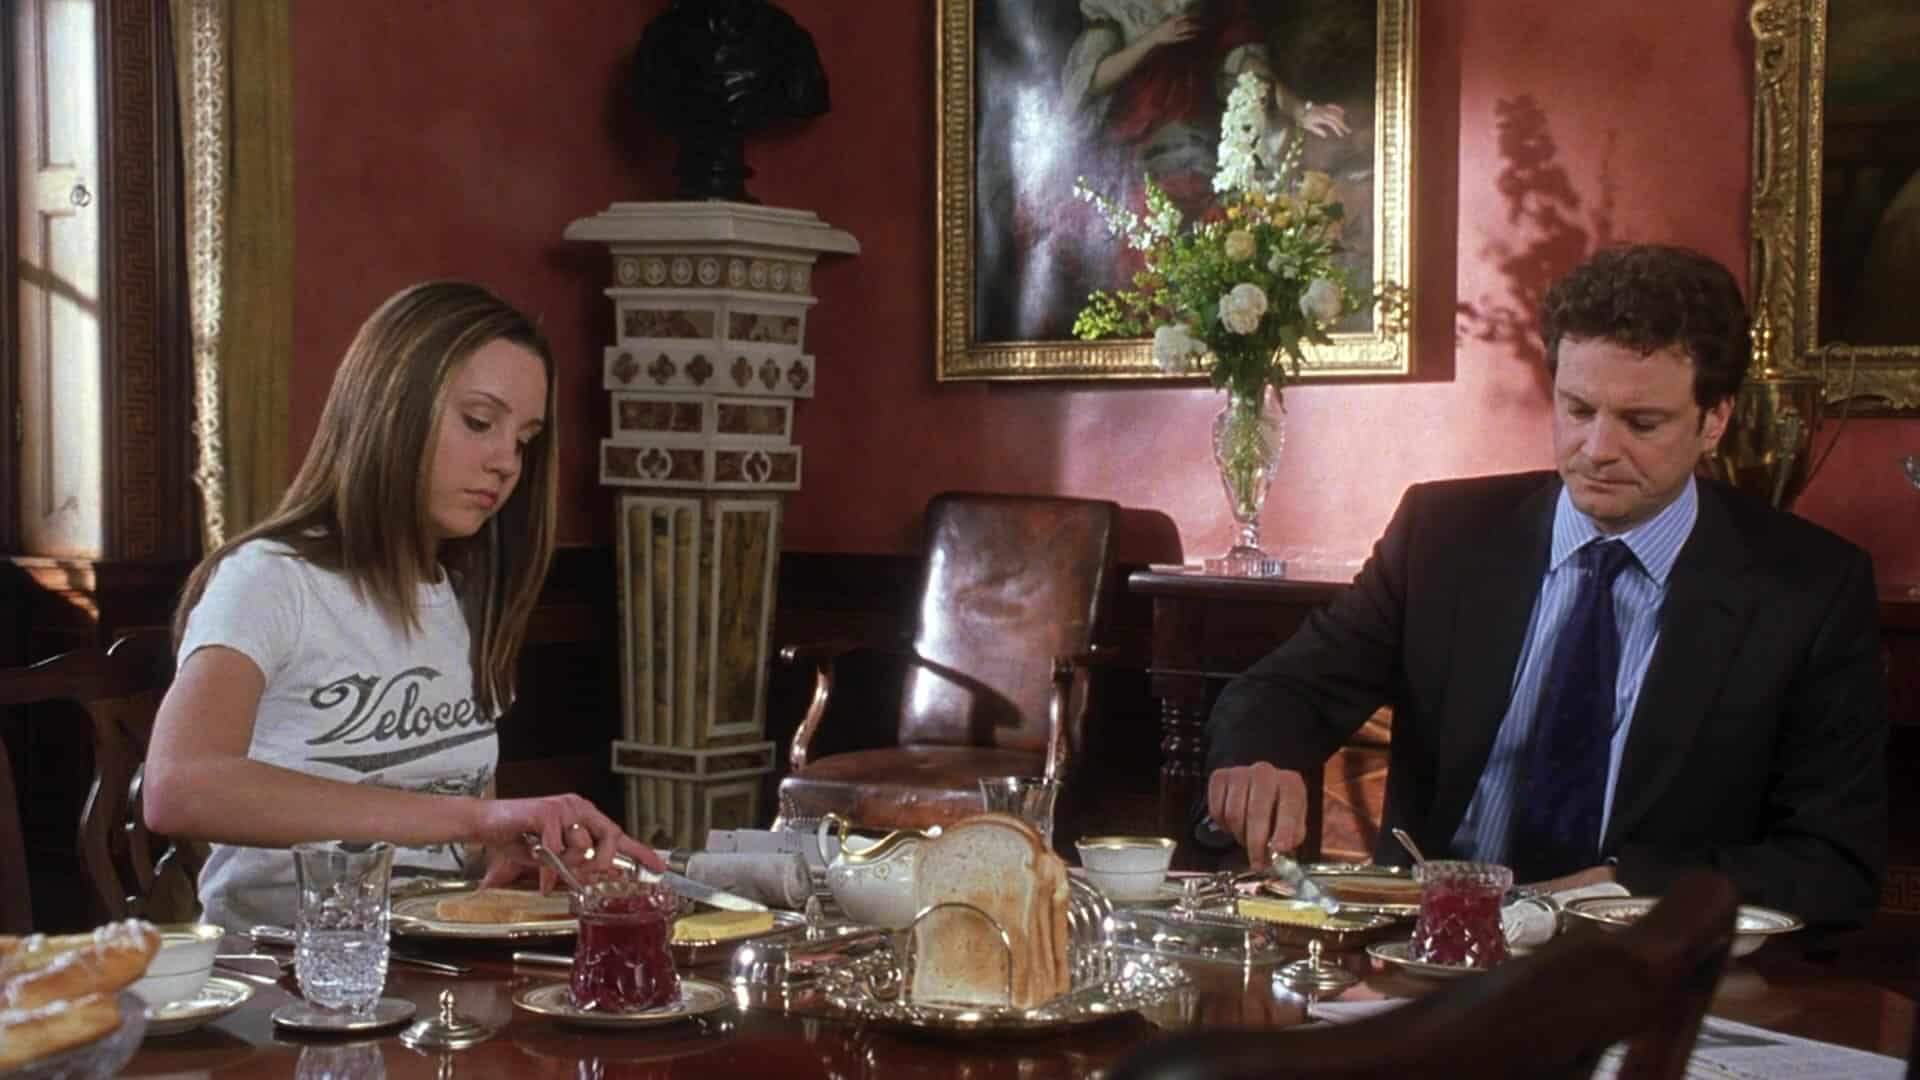 A father and daughter have breakfast in this image from Warner Bros.